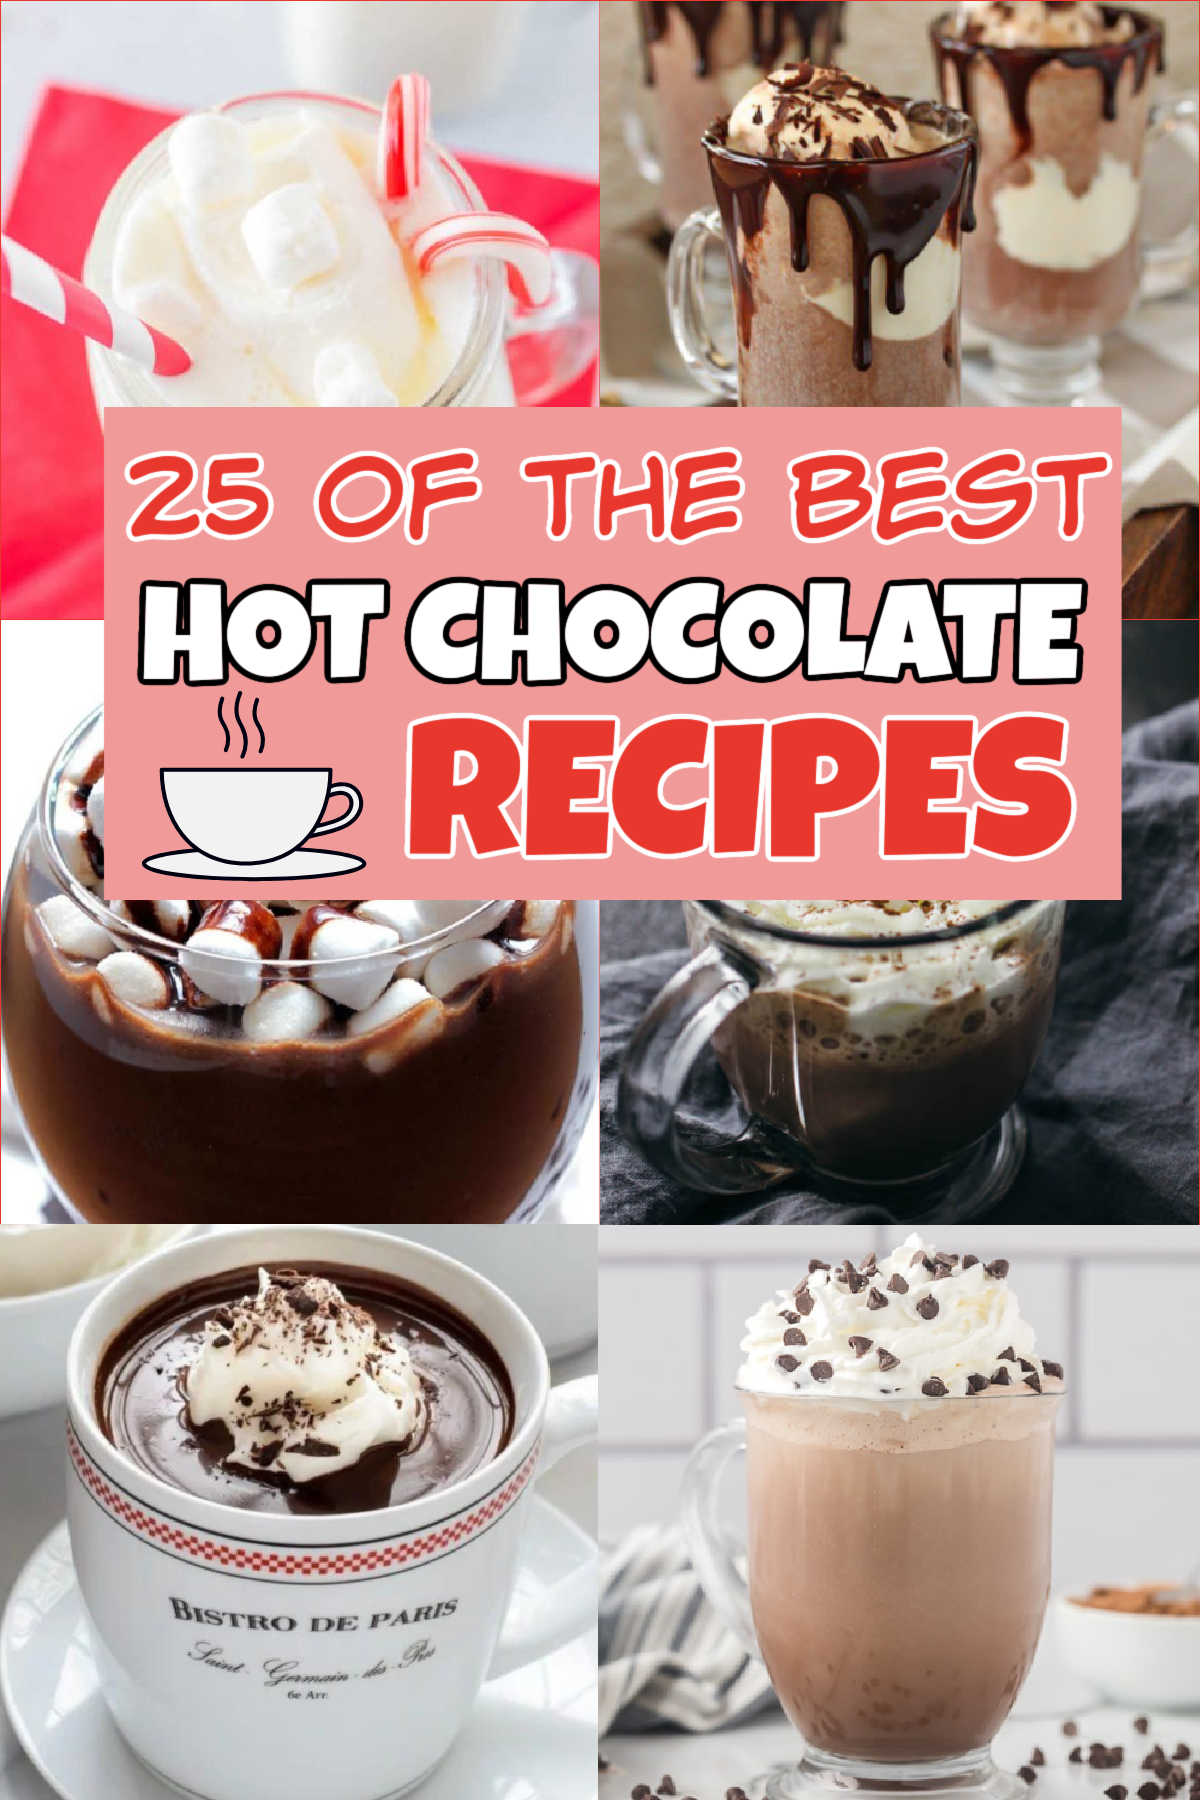 Homemade Hot Chocolate Recipes are easy to make and so decadent. Try over 20 of the best hot chocolate recipes. These hot chocolate recipes are rich and made from scratch with simple ingredients. Homemade hot chocolate taste so much better than store bought. #eatingonadime #hotchocolaterecipes #homemadehotchocolate